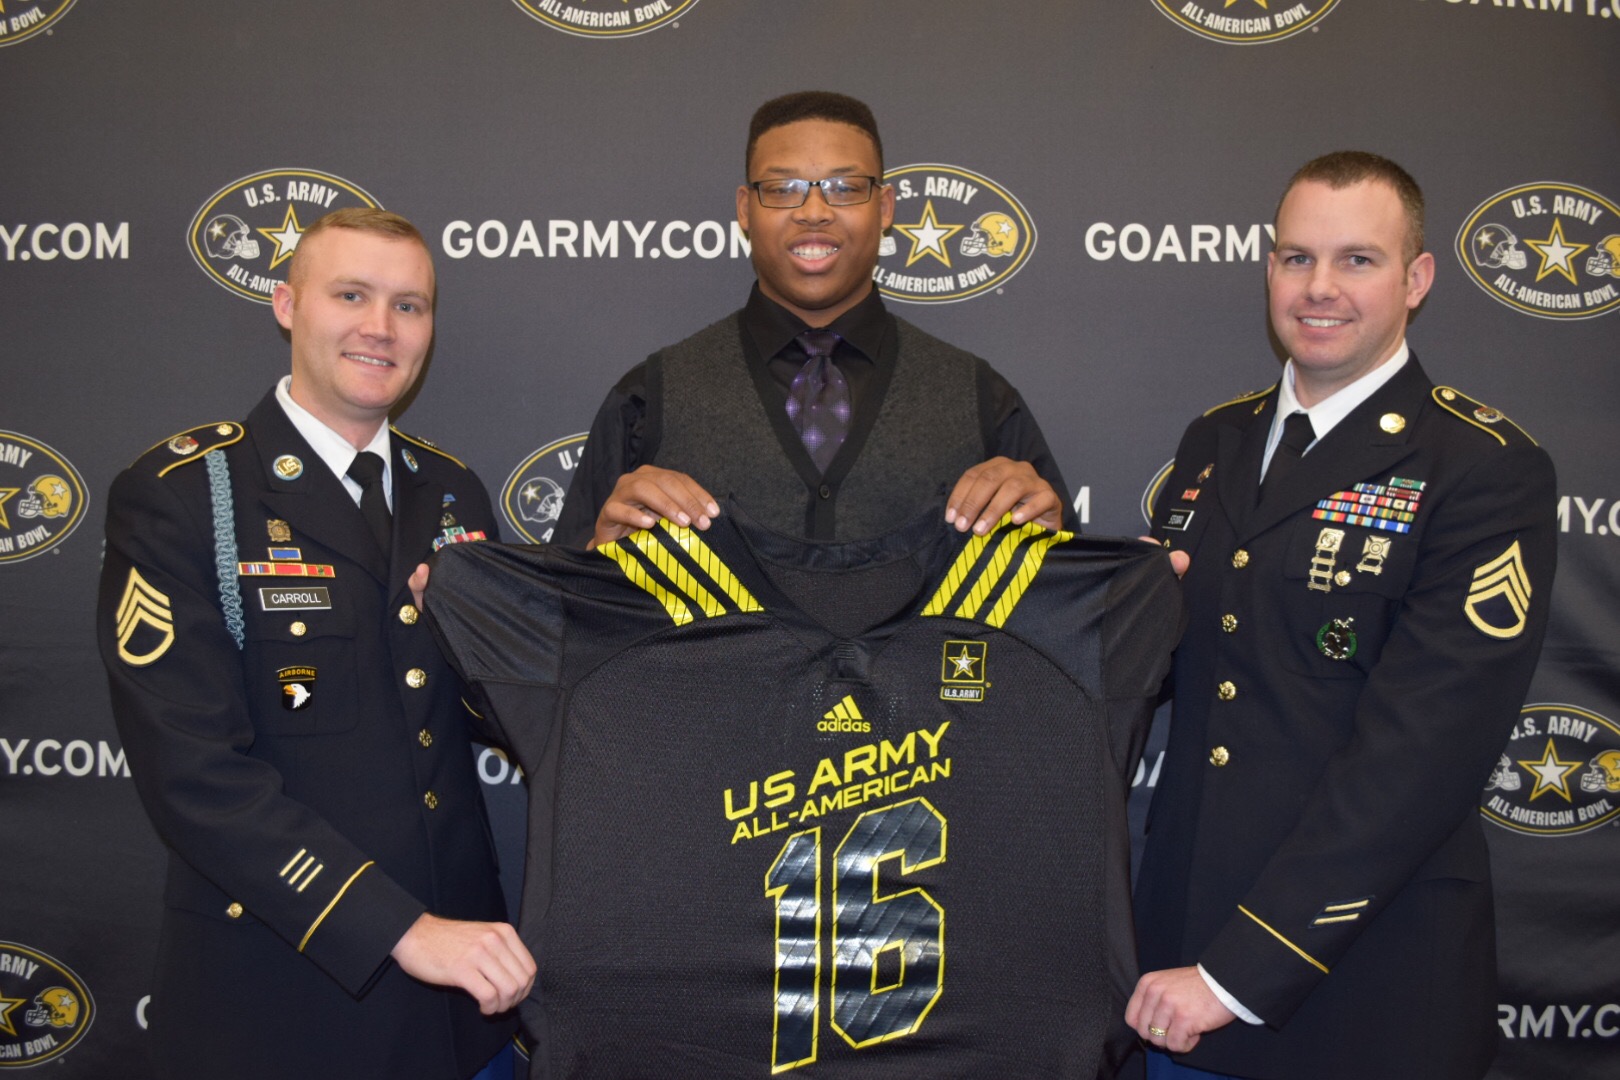 Michael Jordan is presented his Army jersey by (from left) Staff Sergeant Steven Carroll and Staff Sergeant Jeffery Stendman. (Photo: Army All-American Bowl)